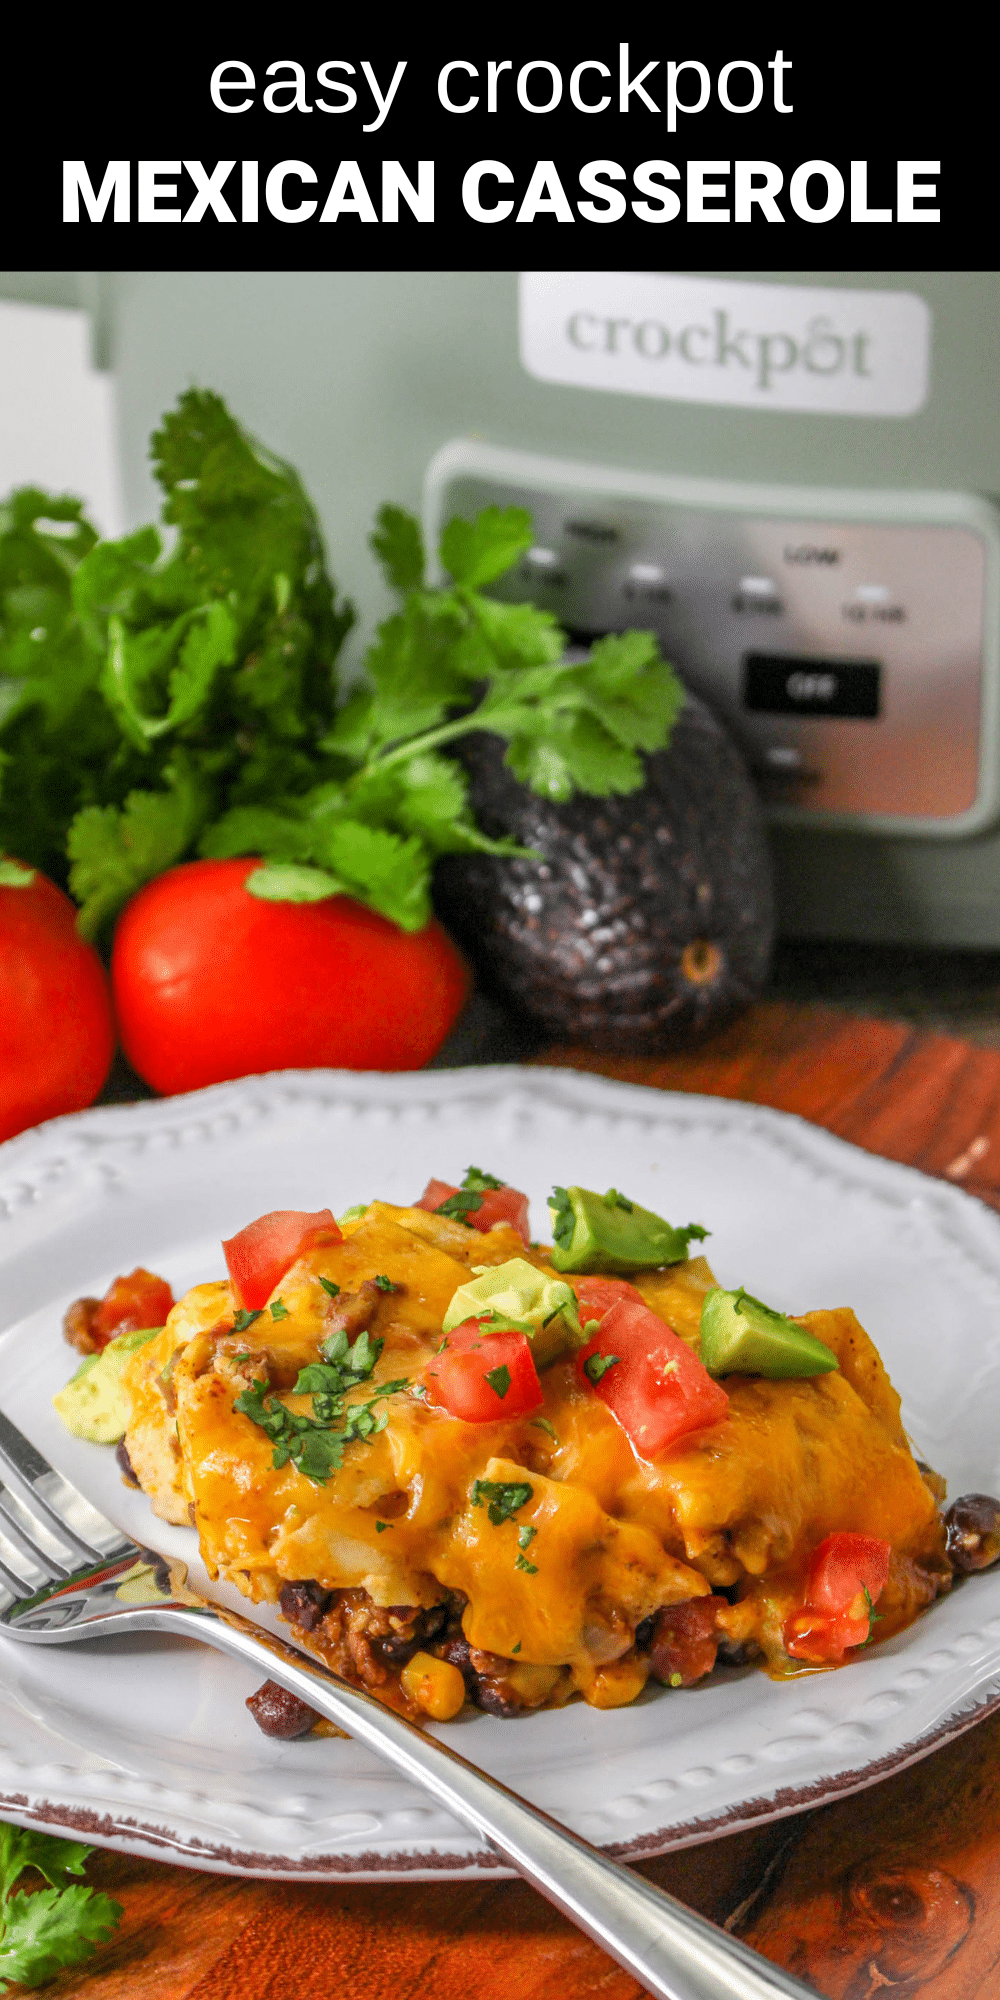 This crockpot Mexican casserole is a great recipe that has just about everything you could ever want in a meal. It’s a delicious, healthy, and easy way to satisfy your craving for Mexican food!